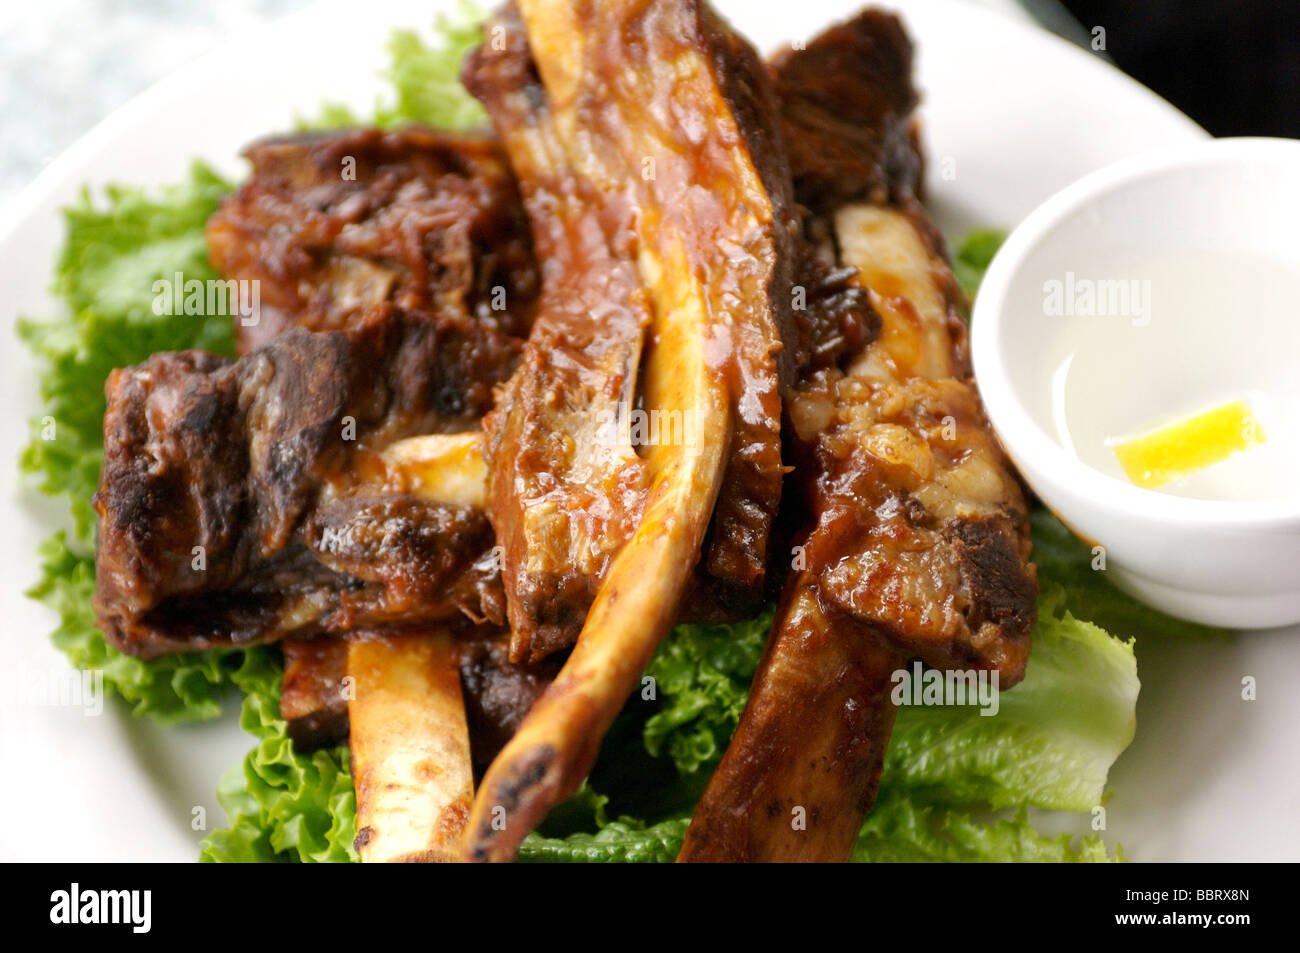 Barbecued pork ribs Stock Photo